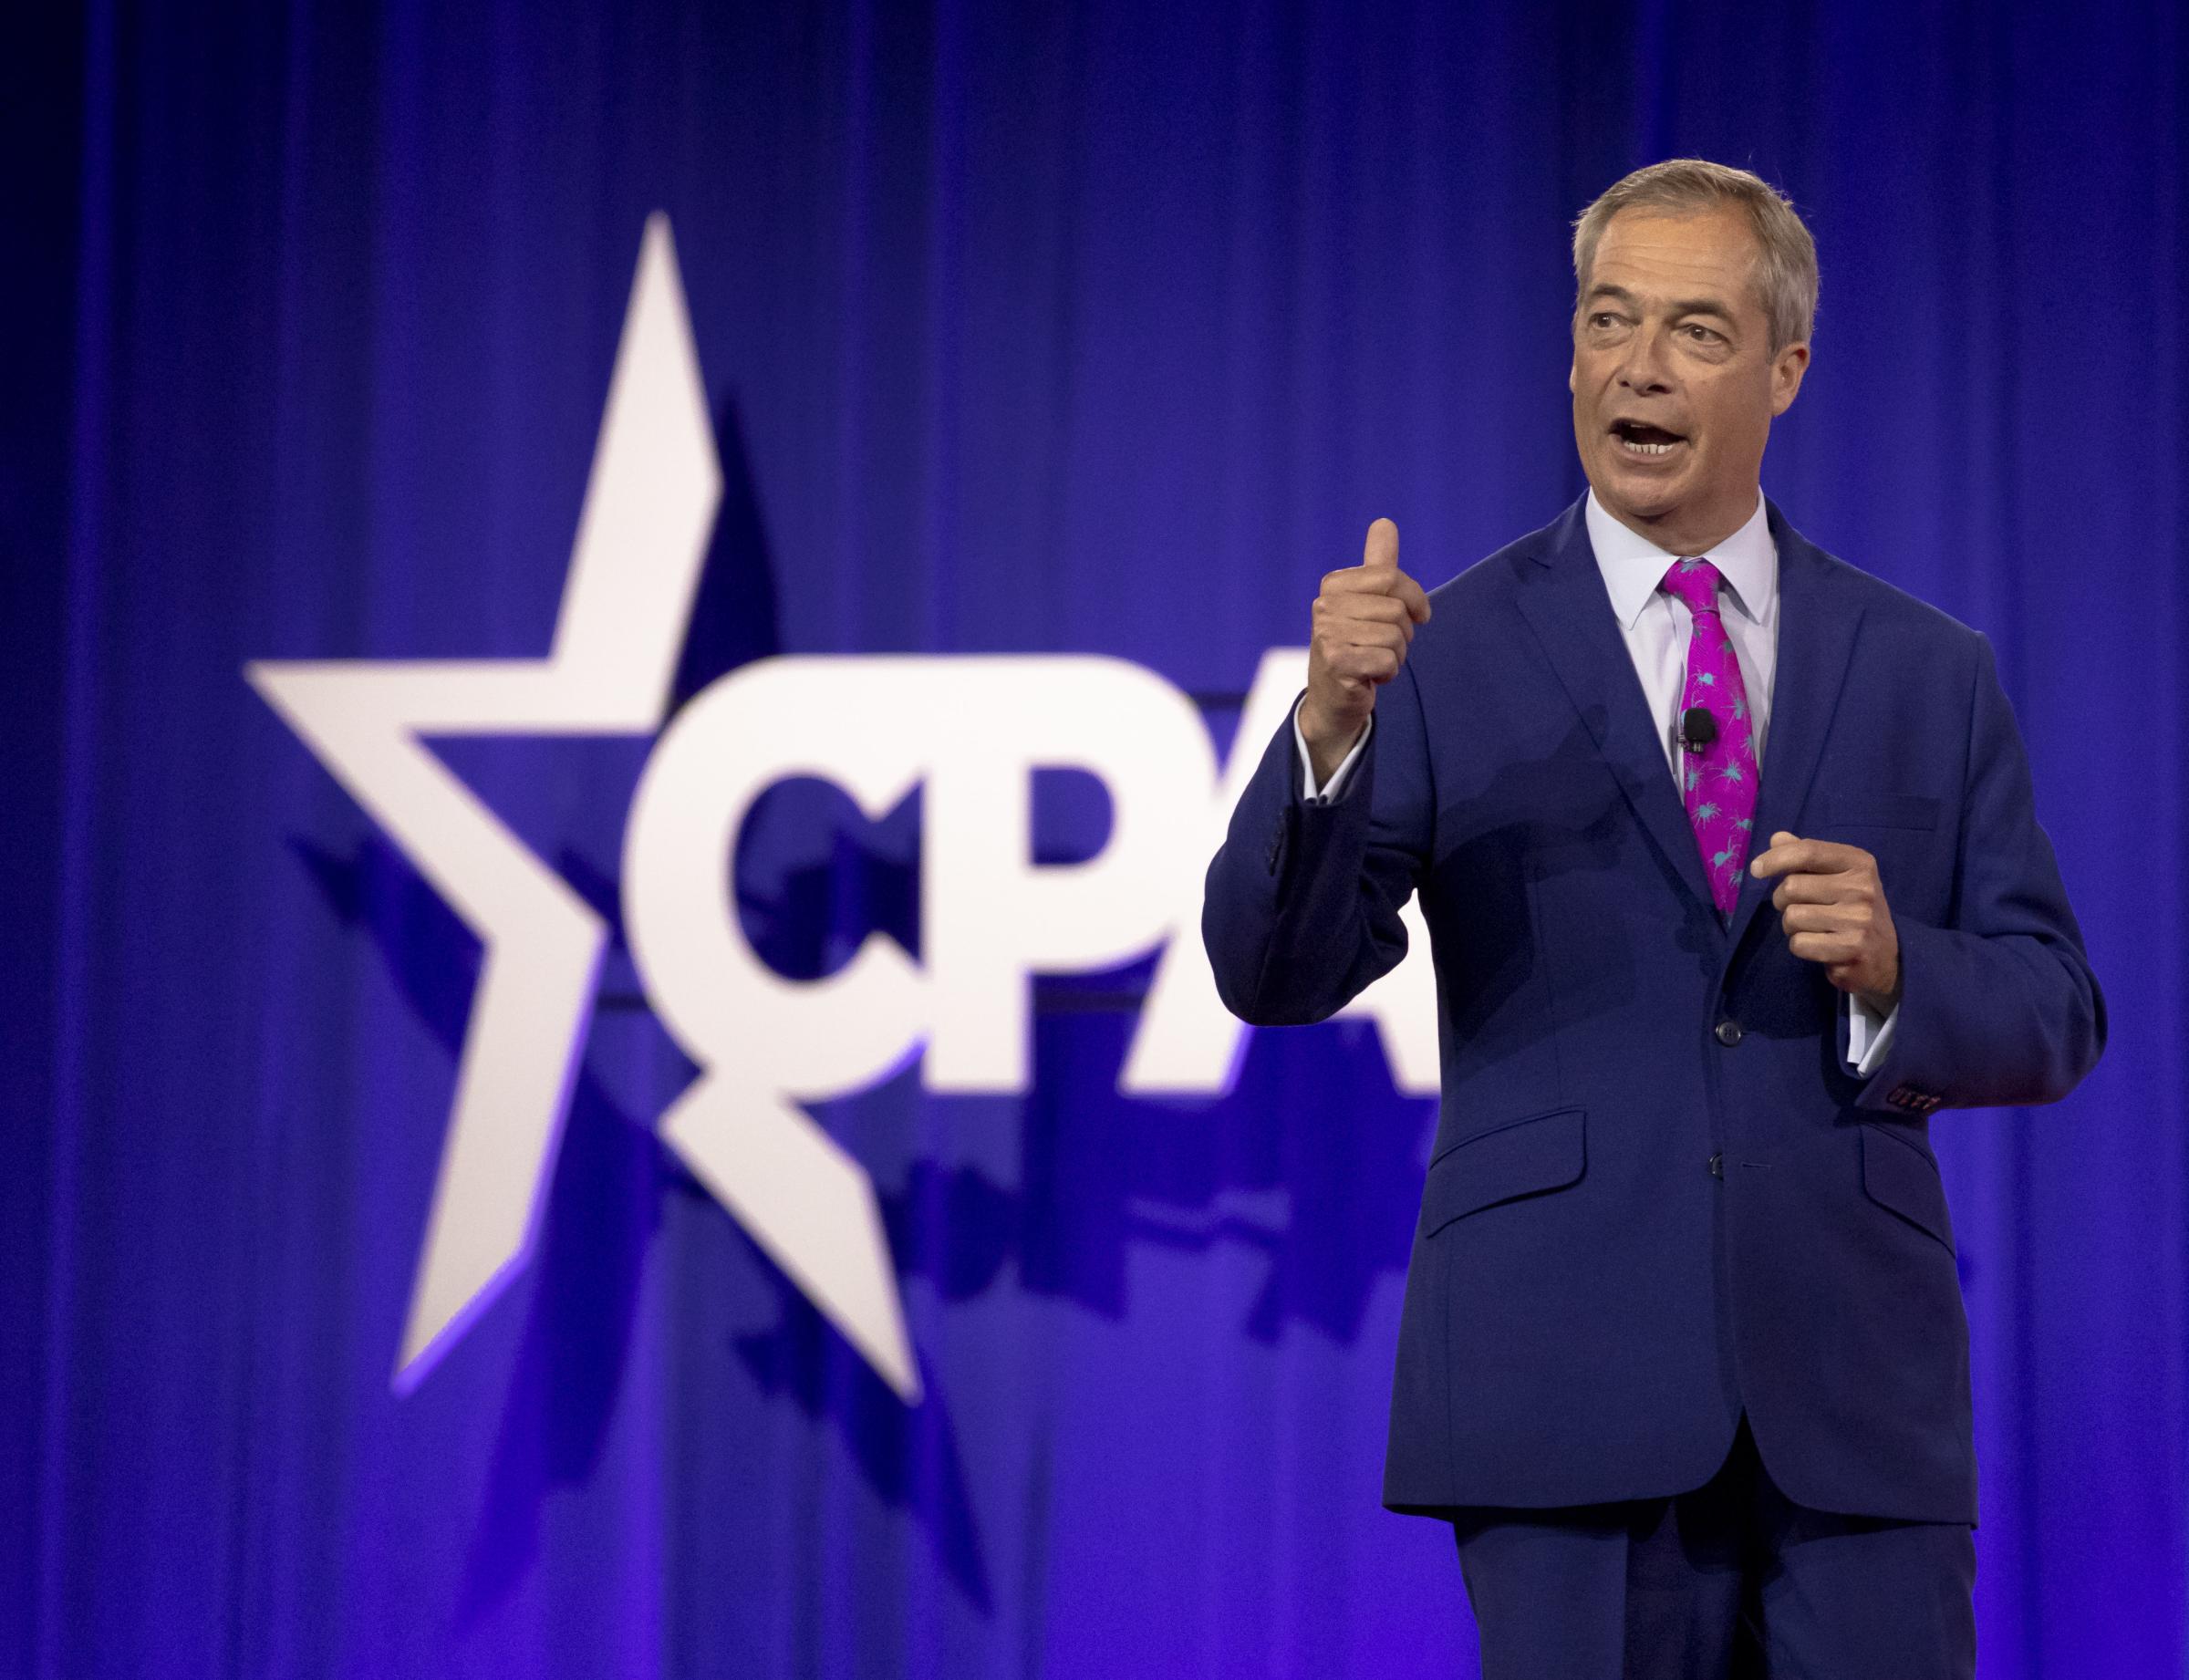 The Conservatives - Nigel Farage, Host of Farage, GB News, Speaks to CPAC...